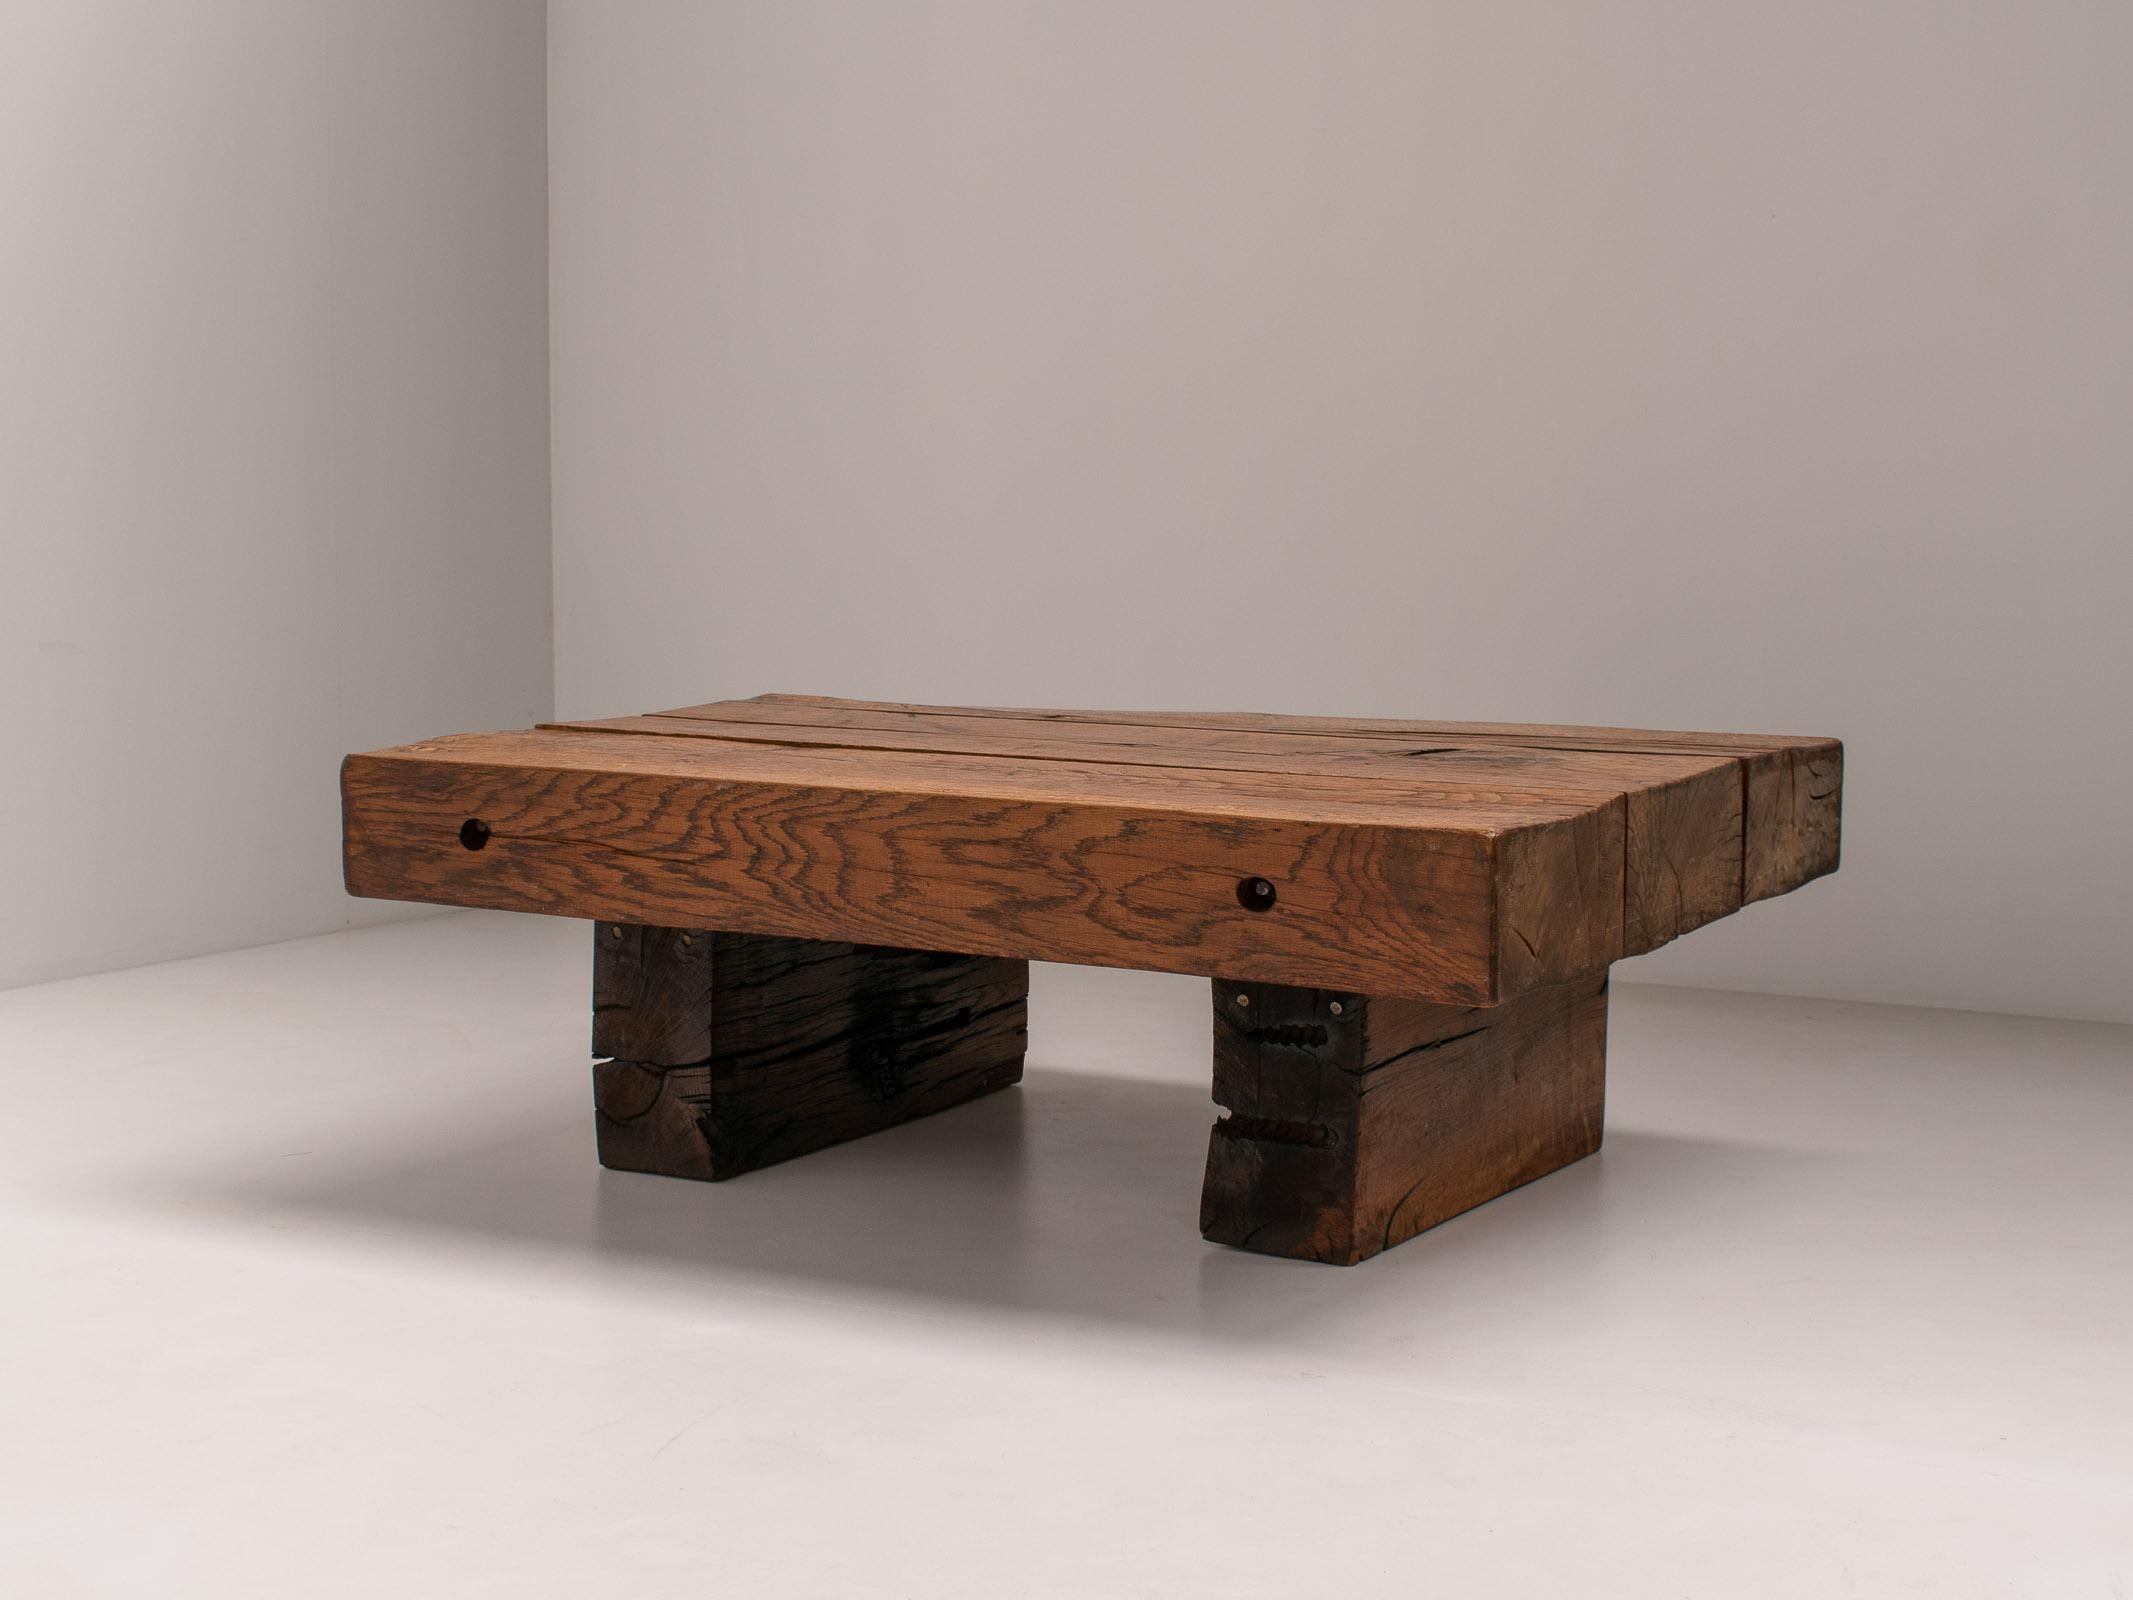 Solid Oak Wabi Sabi coffee table, France, 1950s

The perfect rustic yet modern table that fits any wabi-sabi, natural, artisan, brutalist, or rustic-style interior. Because of its size, it perfectly fits in any interior that needs a more hefty